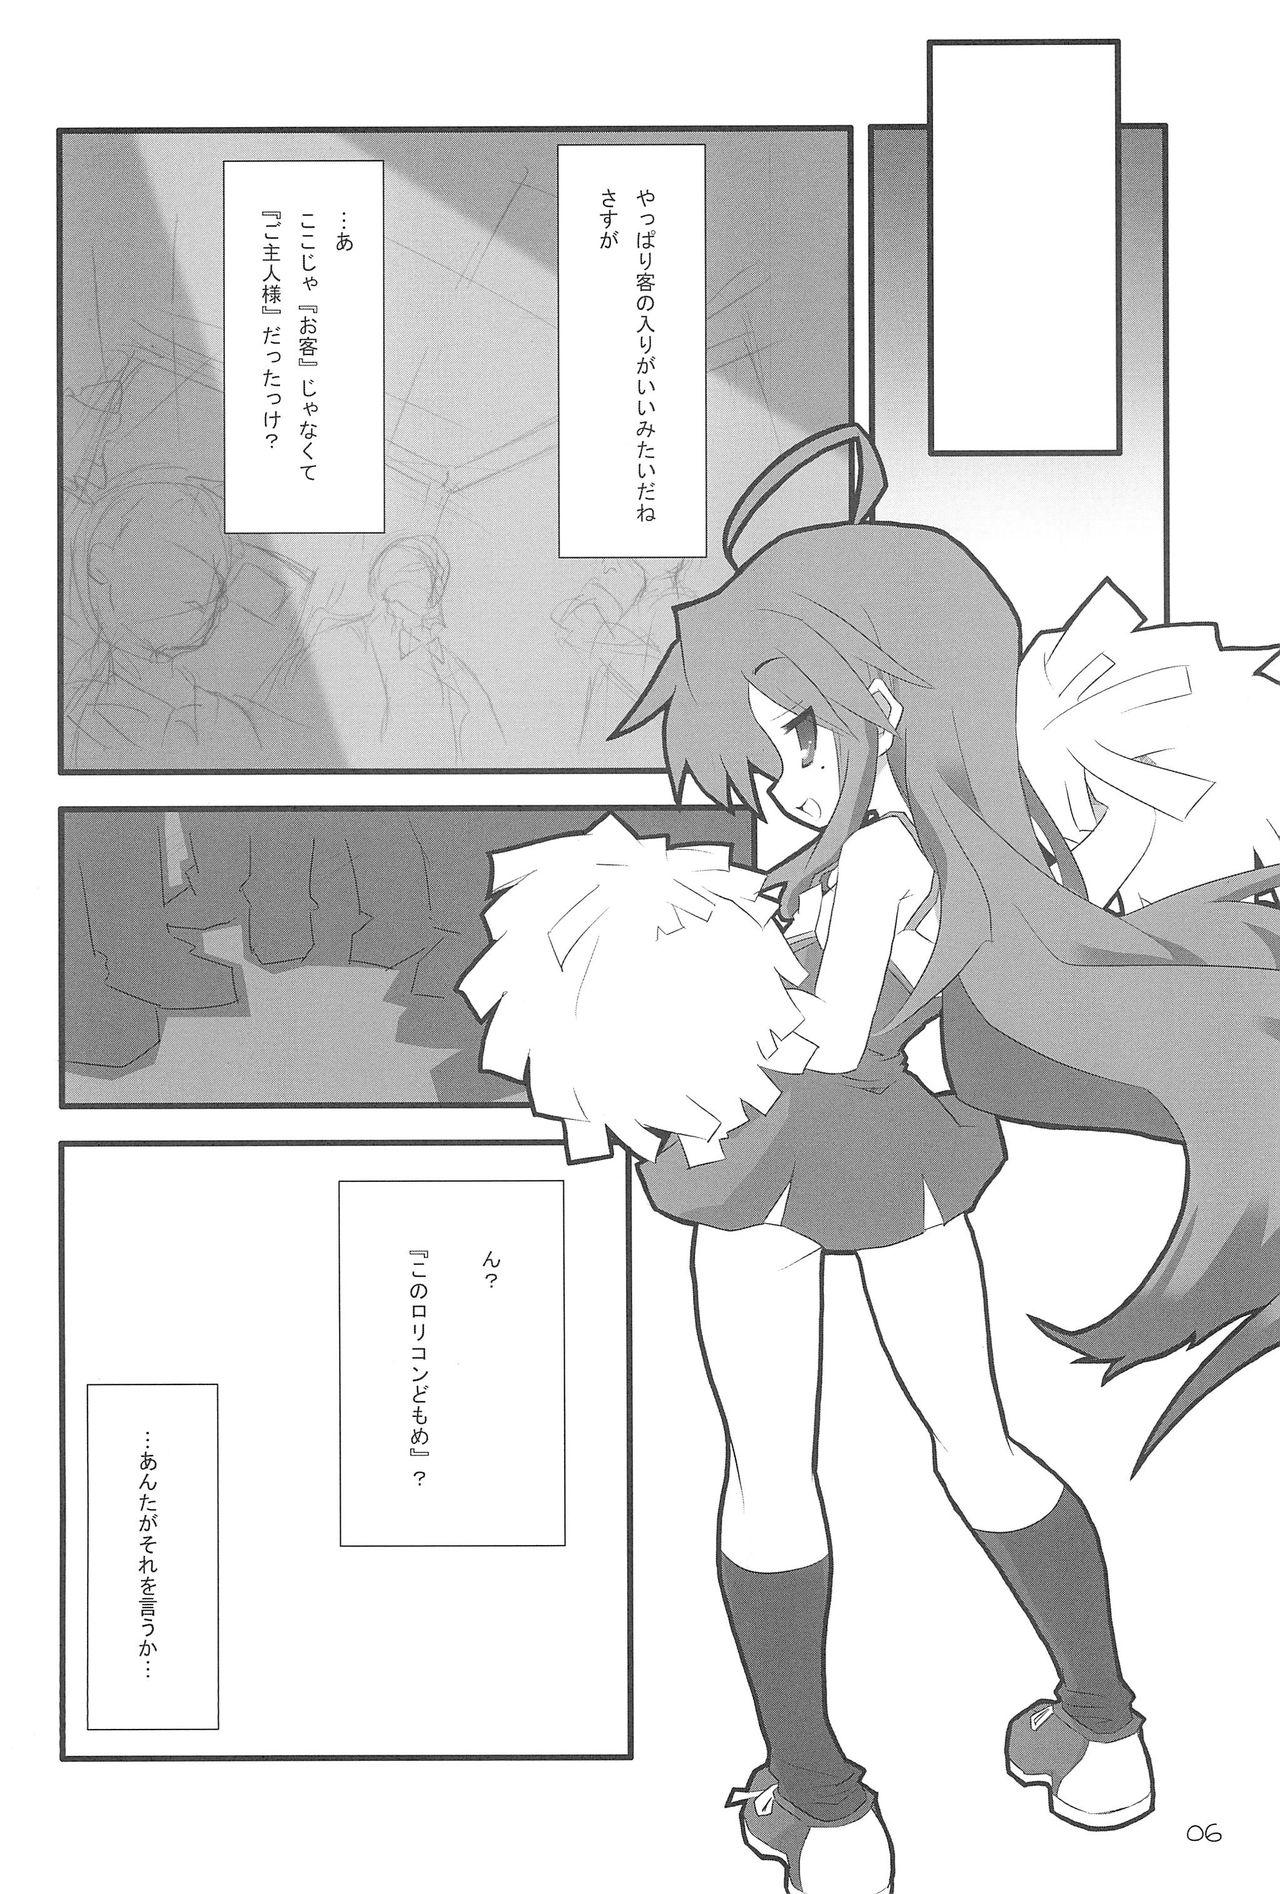 Assfingering LUCKY STRIKE! - Lucky star Cogiendo - Page 6